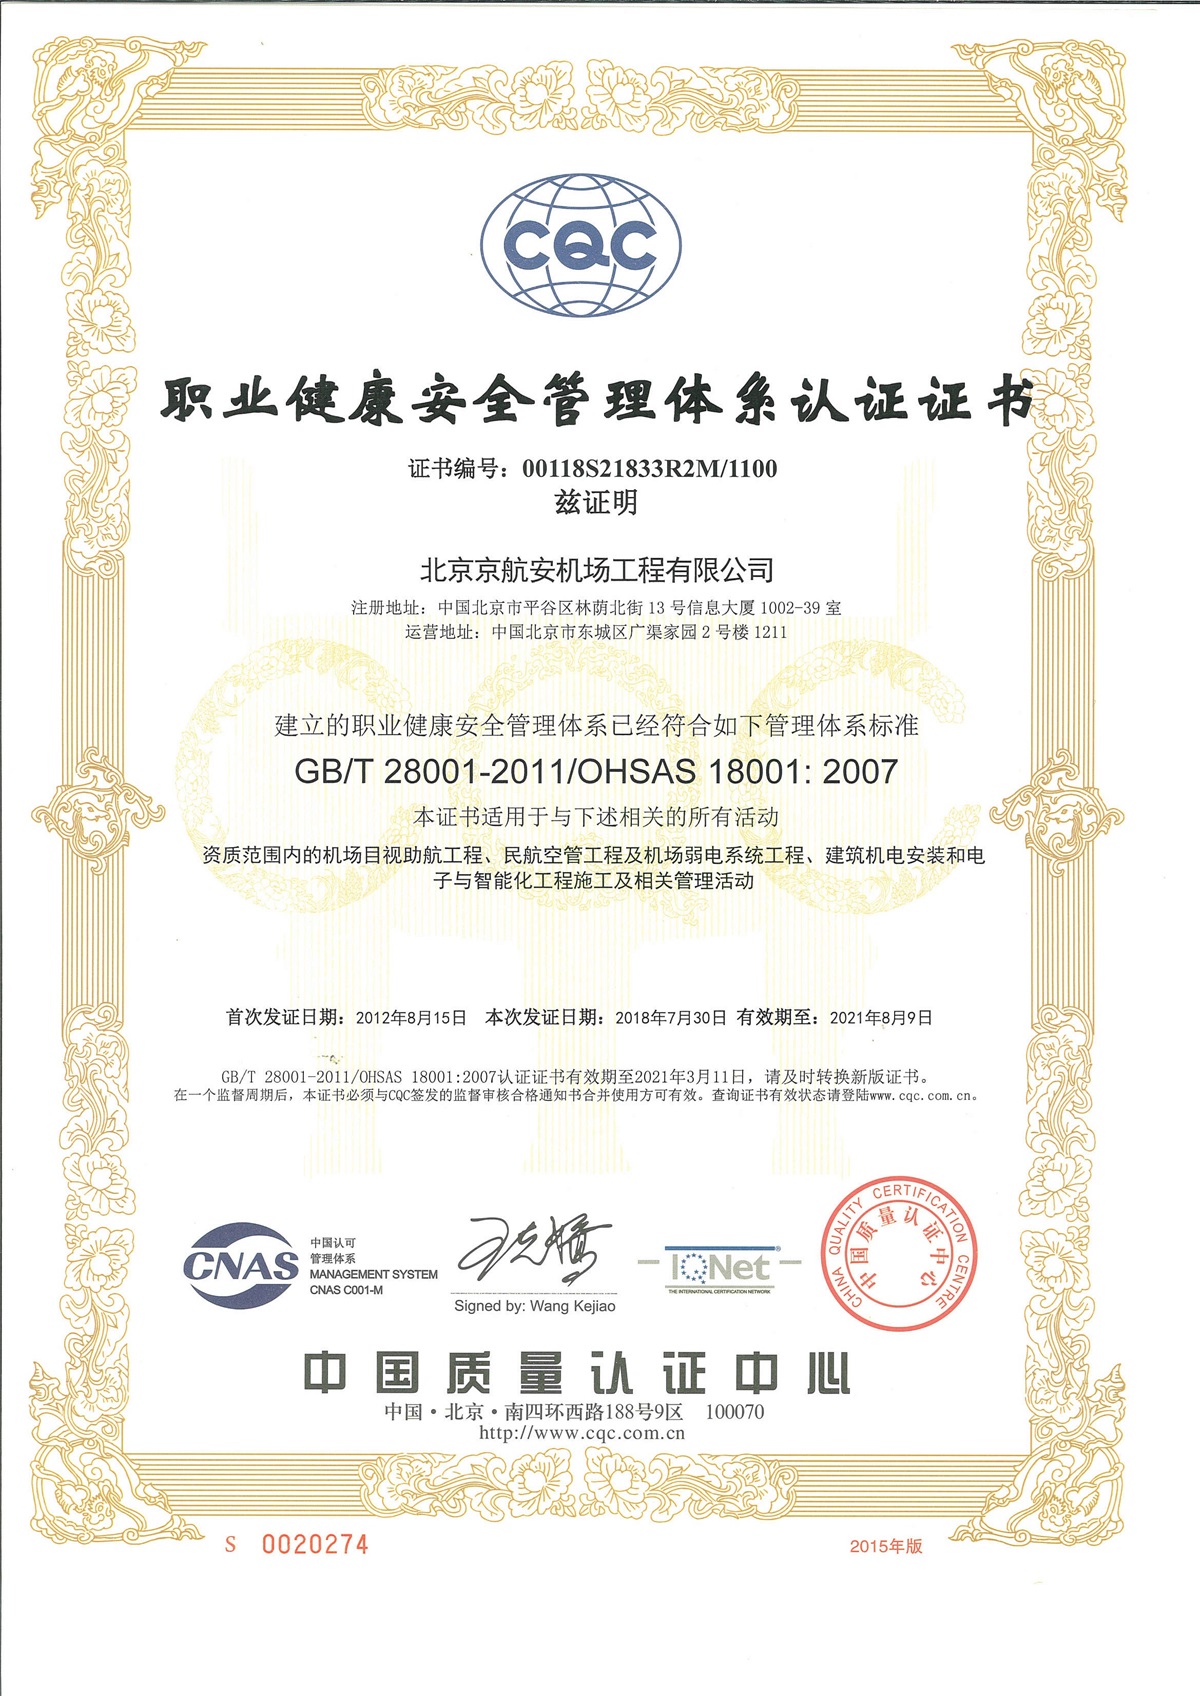 Certification of Occupational Health and Safety Management System